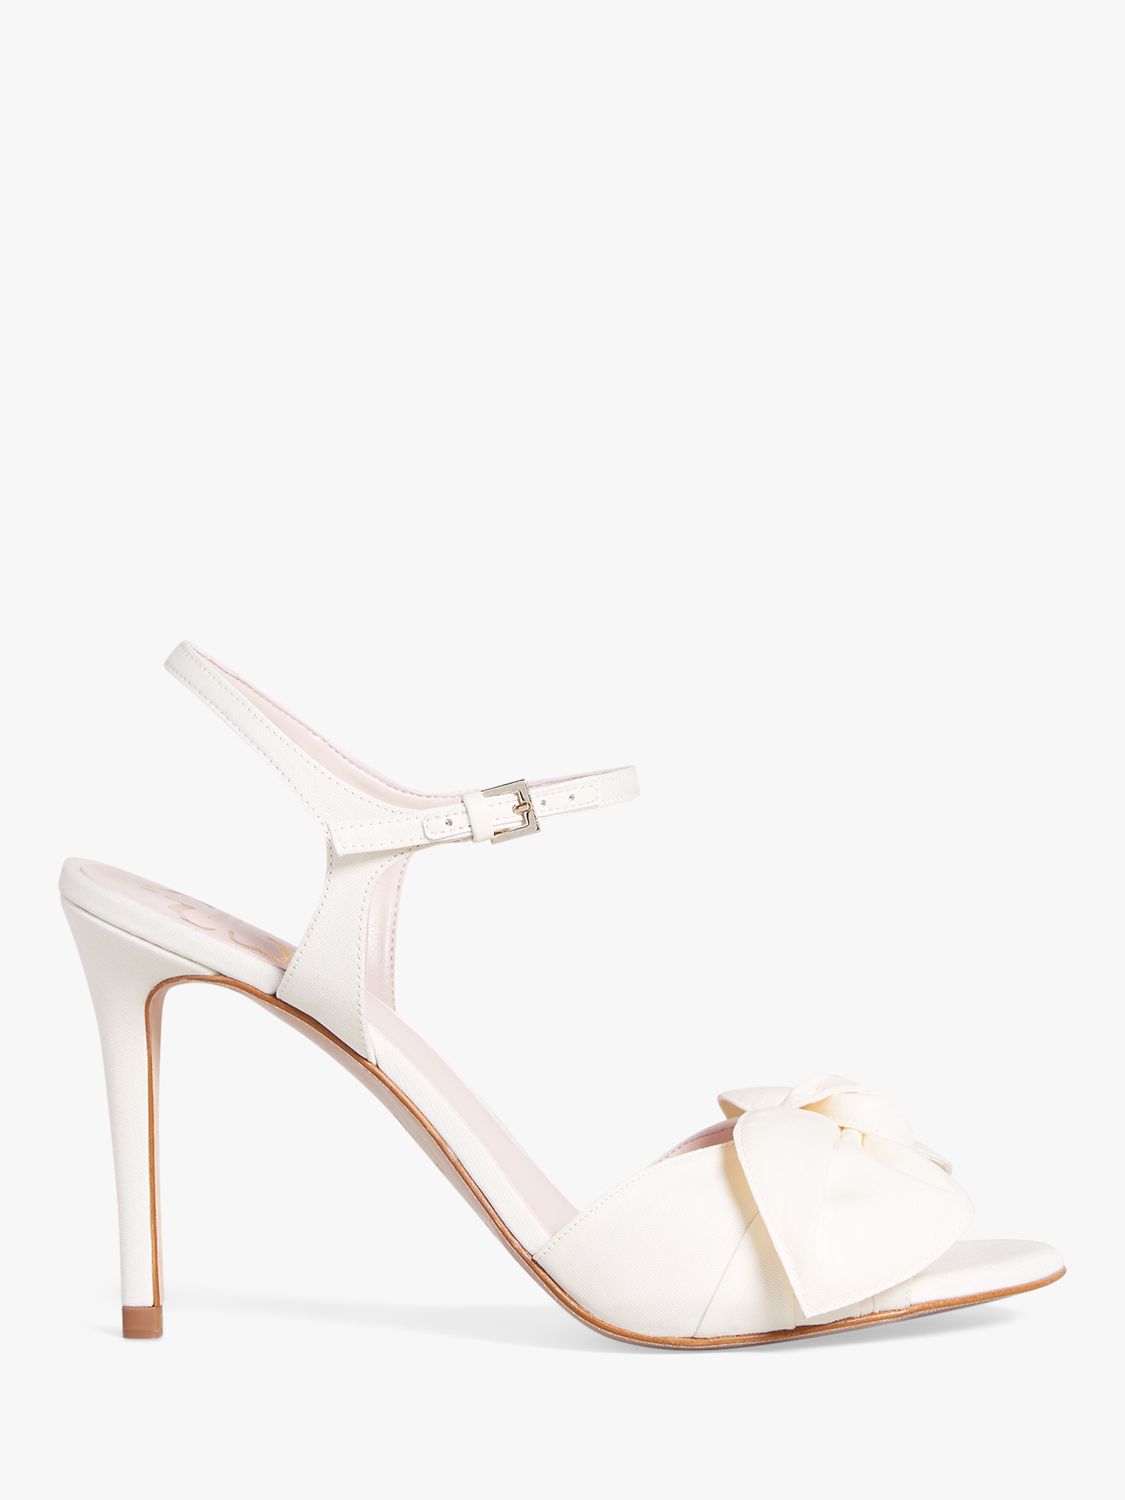 Ted Baker Heevia Bow Stiletto Heel Sandals, Ivory at John Lewis & Partners